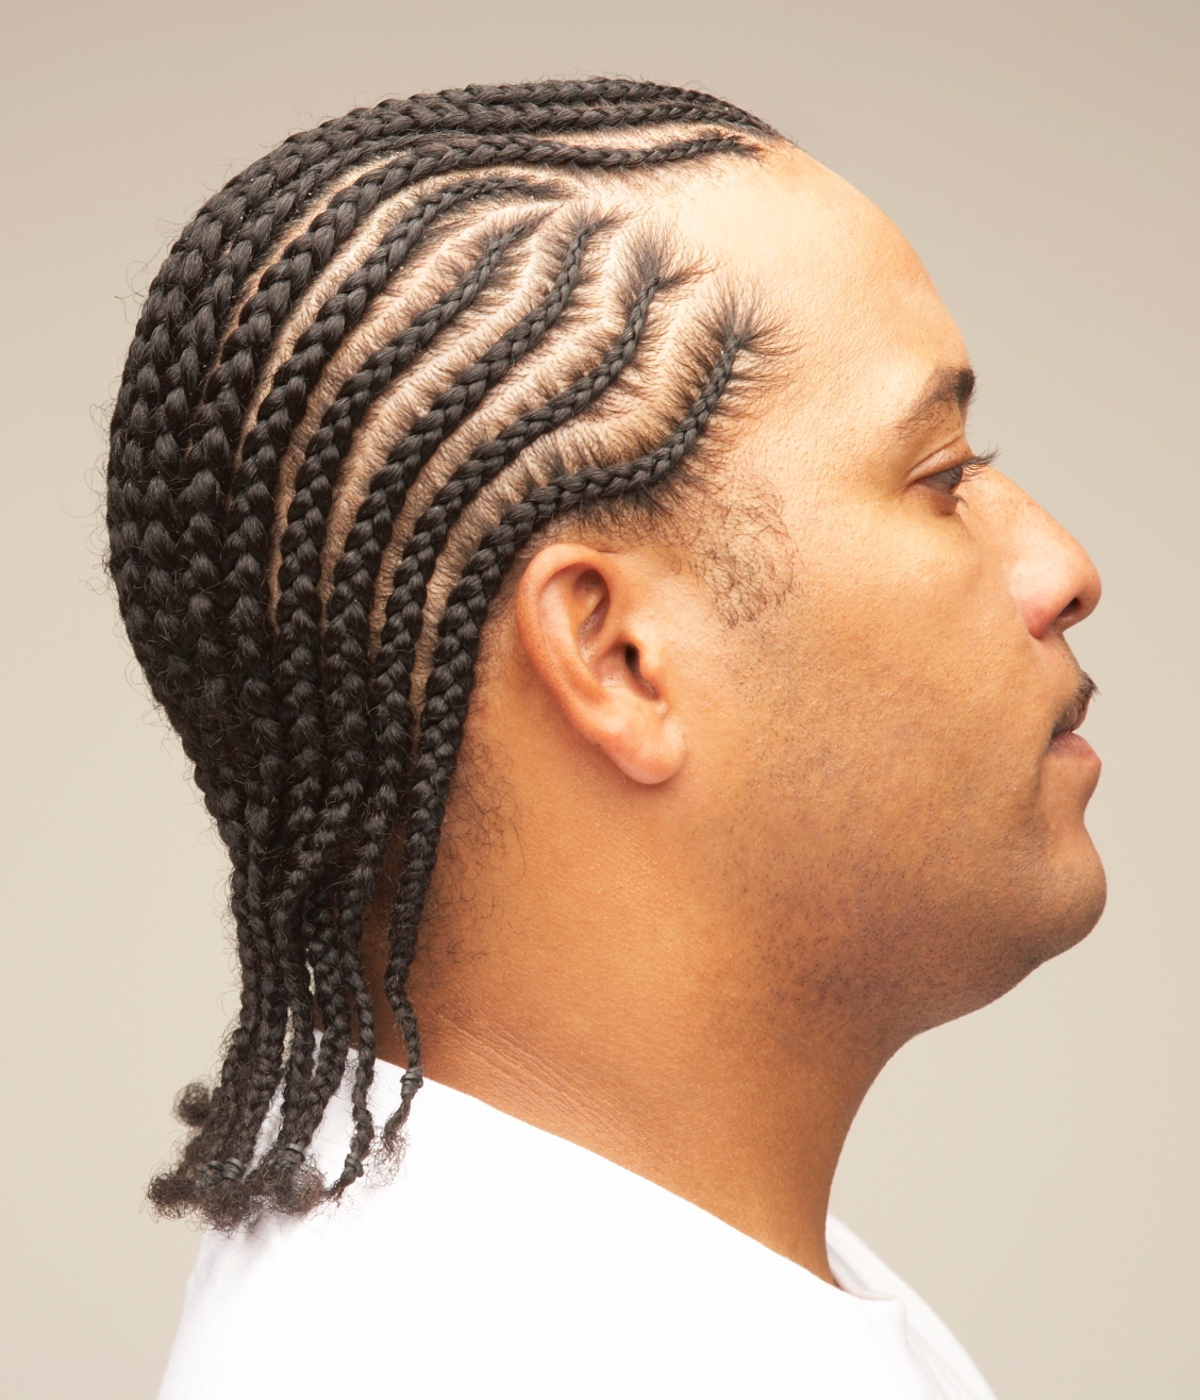 Braided Hairstyles For Men That Will Catch Everyone S Eye Men Wit